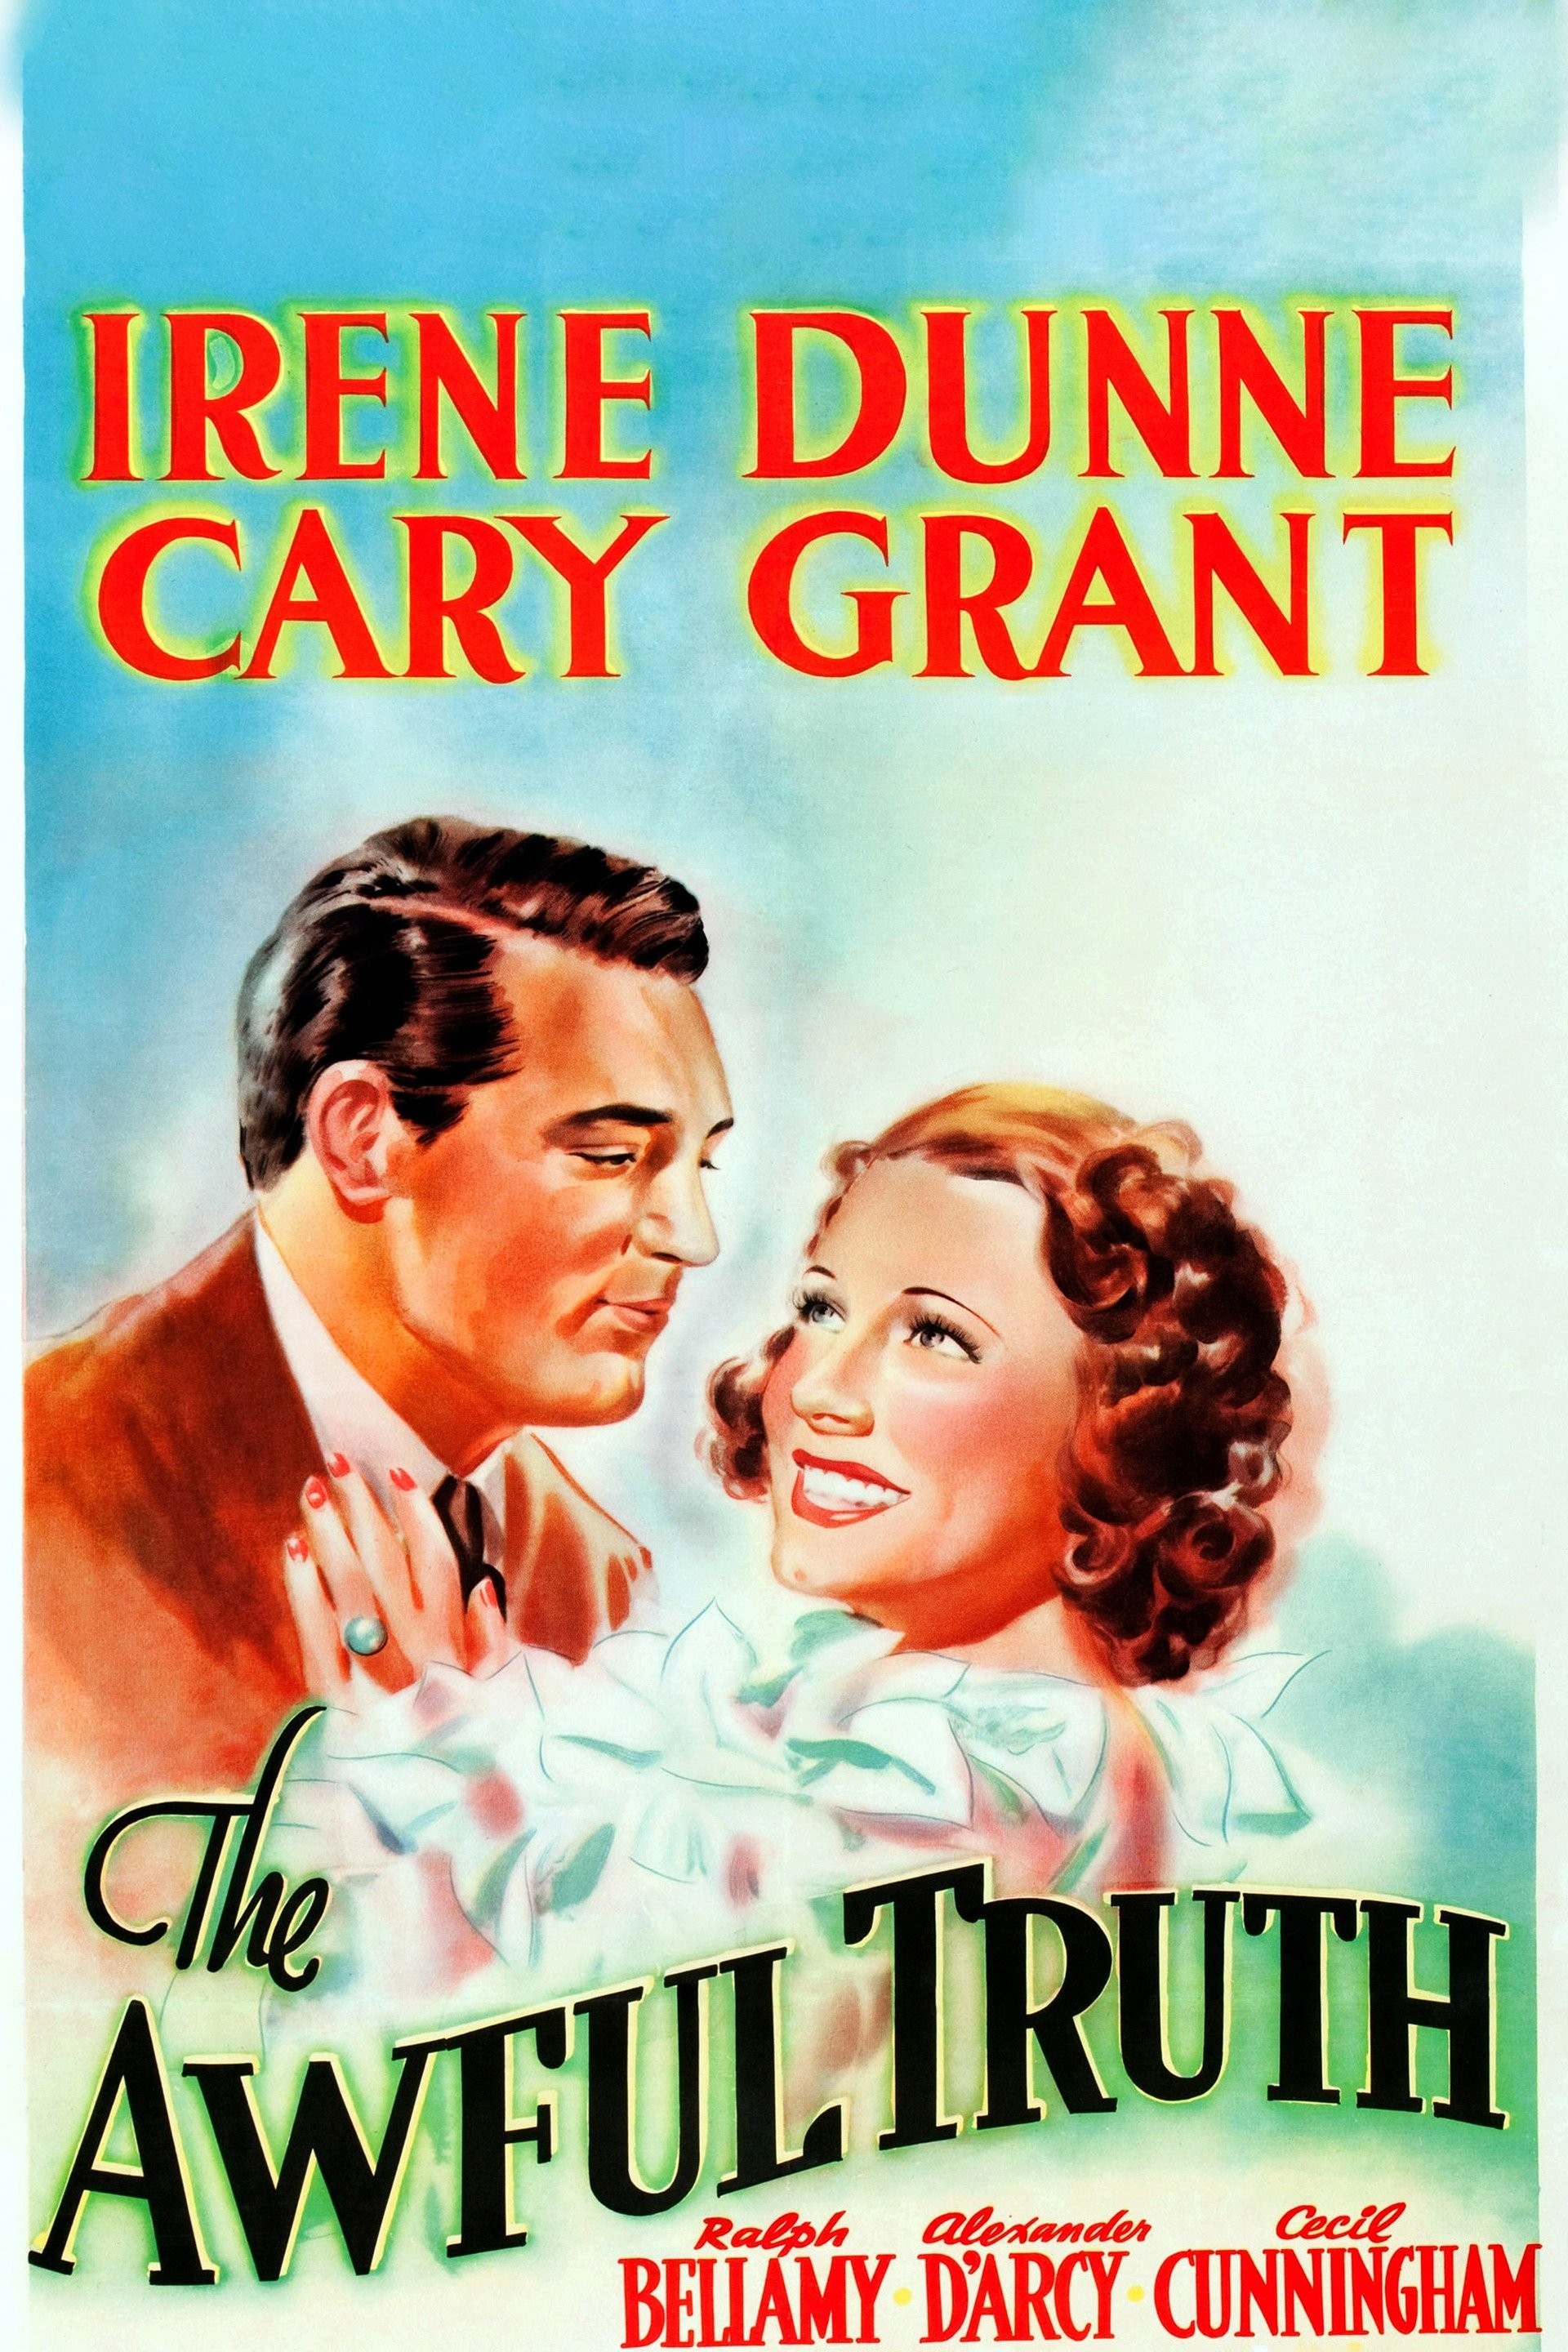  The Awful Truth : Irene Dunne, Cary Grant, Ralph Bellamy,  Alexander D'Arcy, Cecil Cunningham, Molly Lamont, Esther Dale, Joyce  Compton, Robert Allen, Robert Warwick, Mary Forbes, Claud Allister, Joseph  Walker, Leo